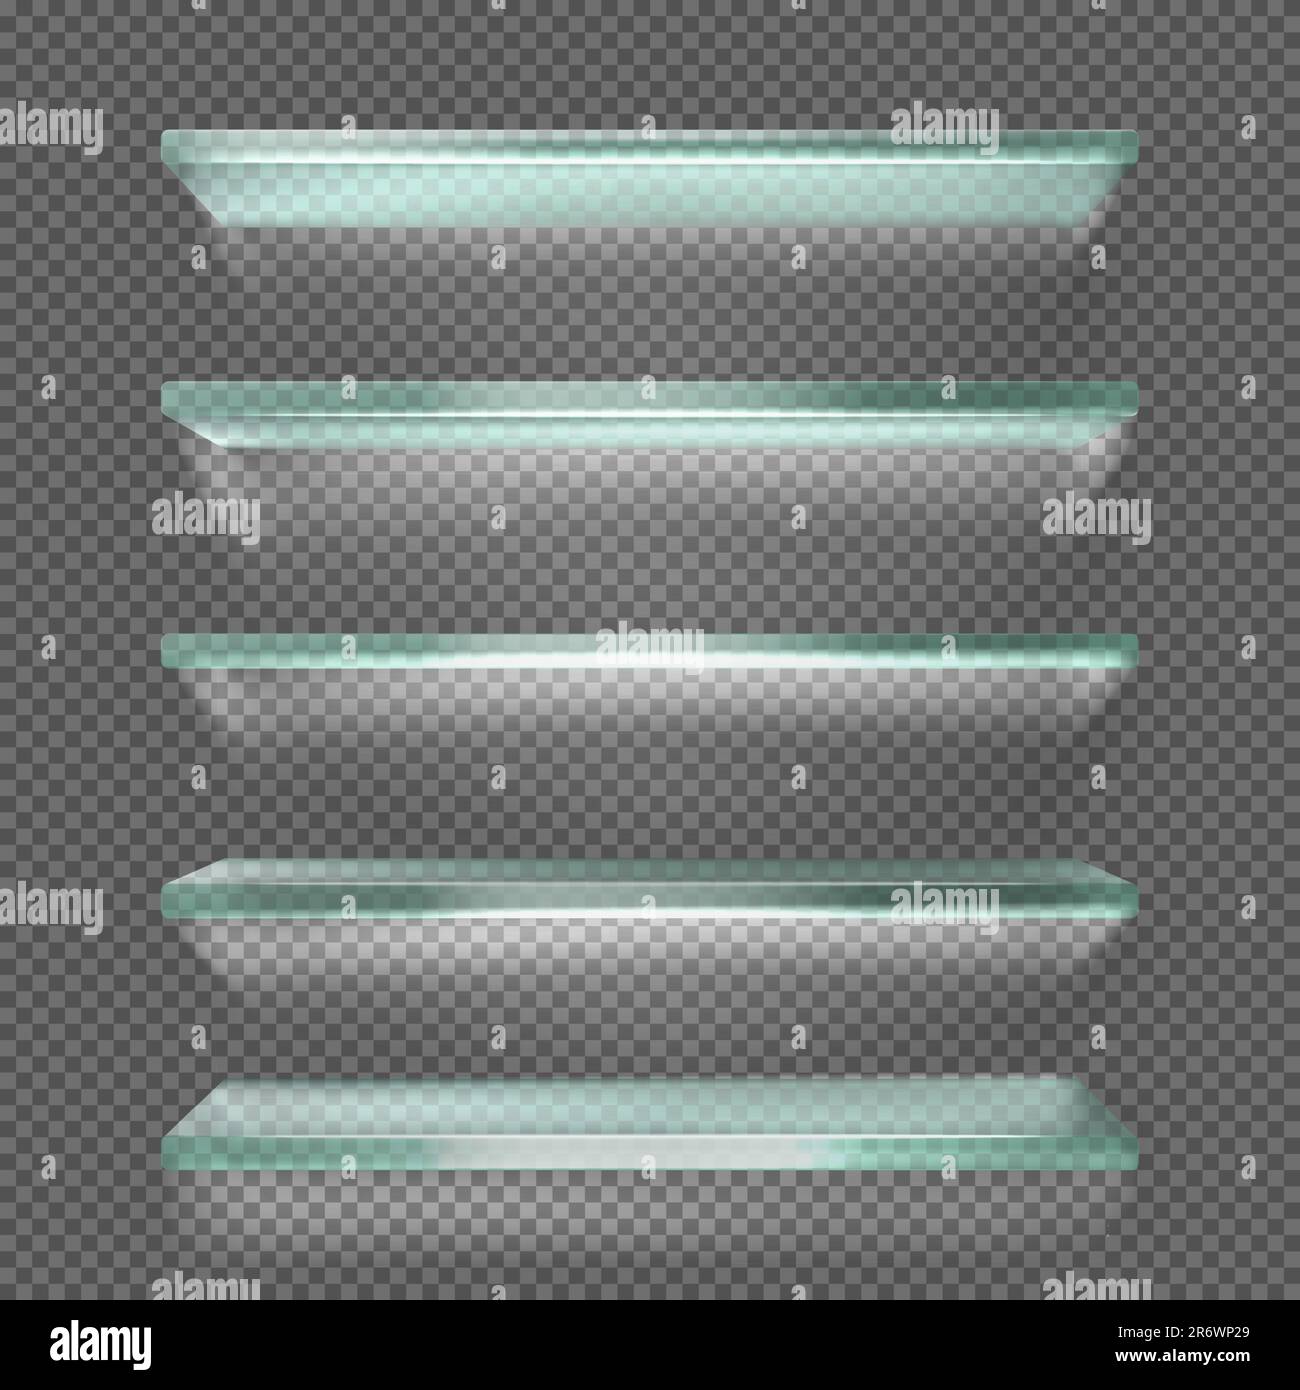 Glass shelves with backlight, ice rack isolated on transparent background. Empty clear translucent illuminated ledges or wall bookshelves. Design element for room decoration Realistic 3d vector mockup Stock Vector